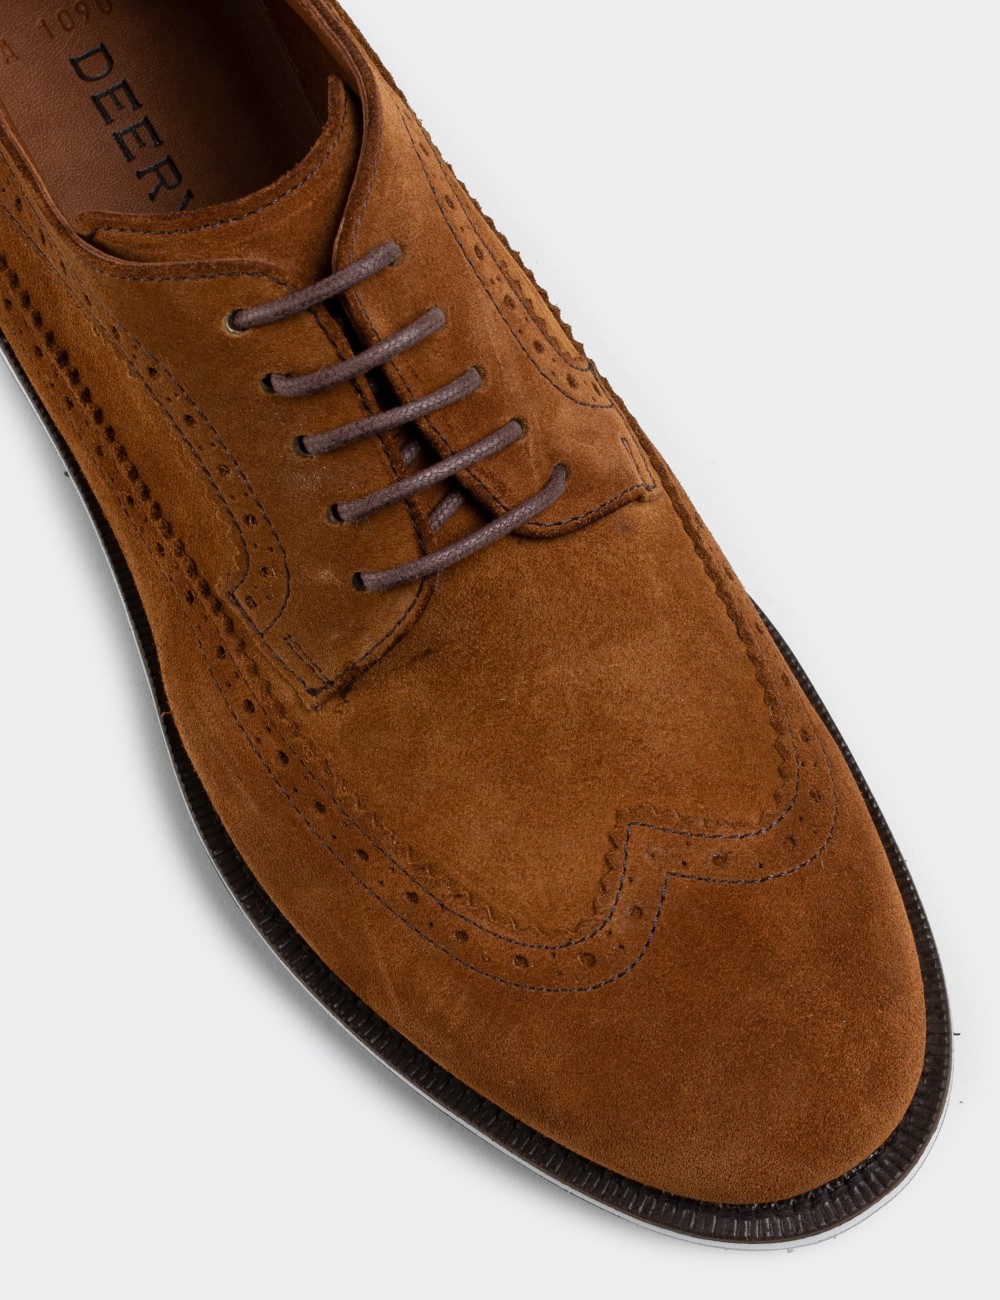 Tan Suede Leather Lace-up Shoes - 01293MTBAE13